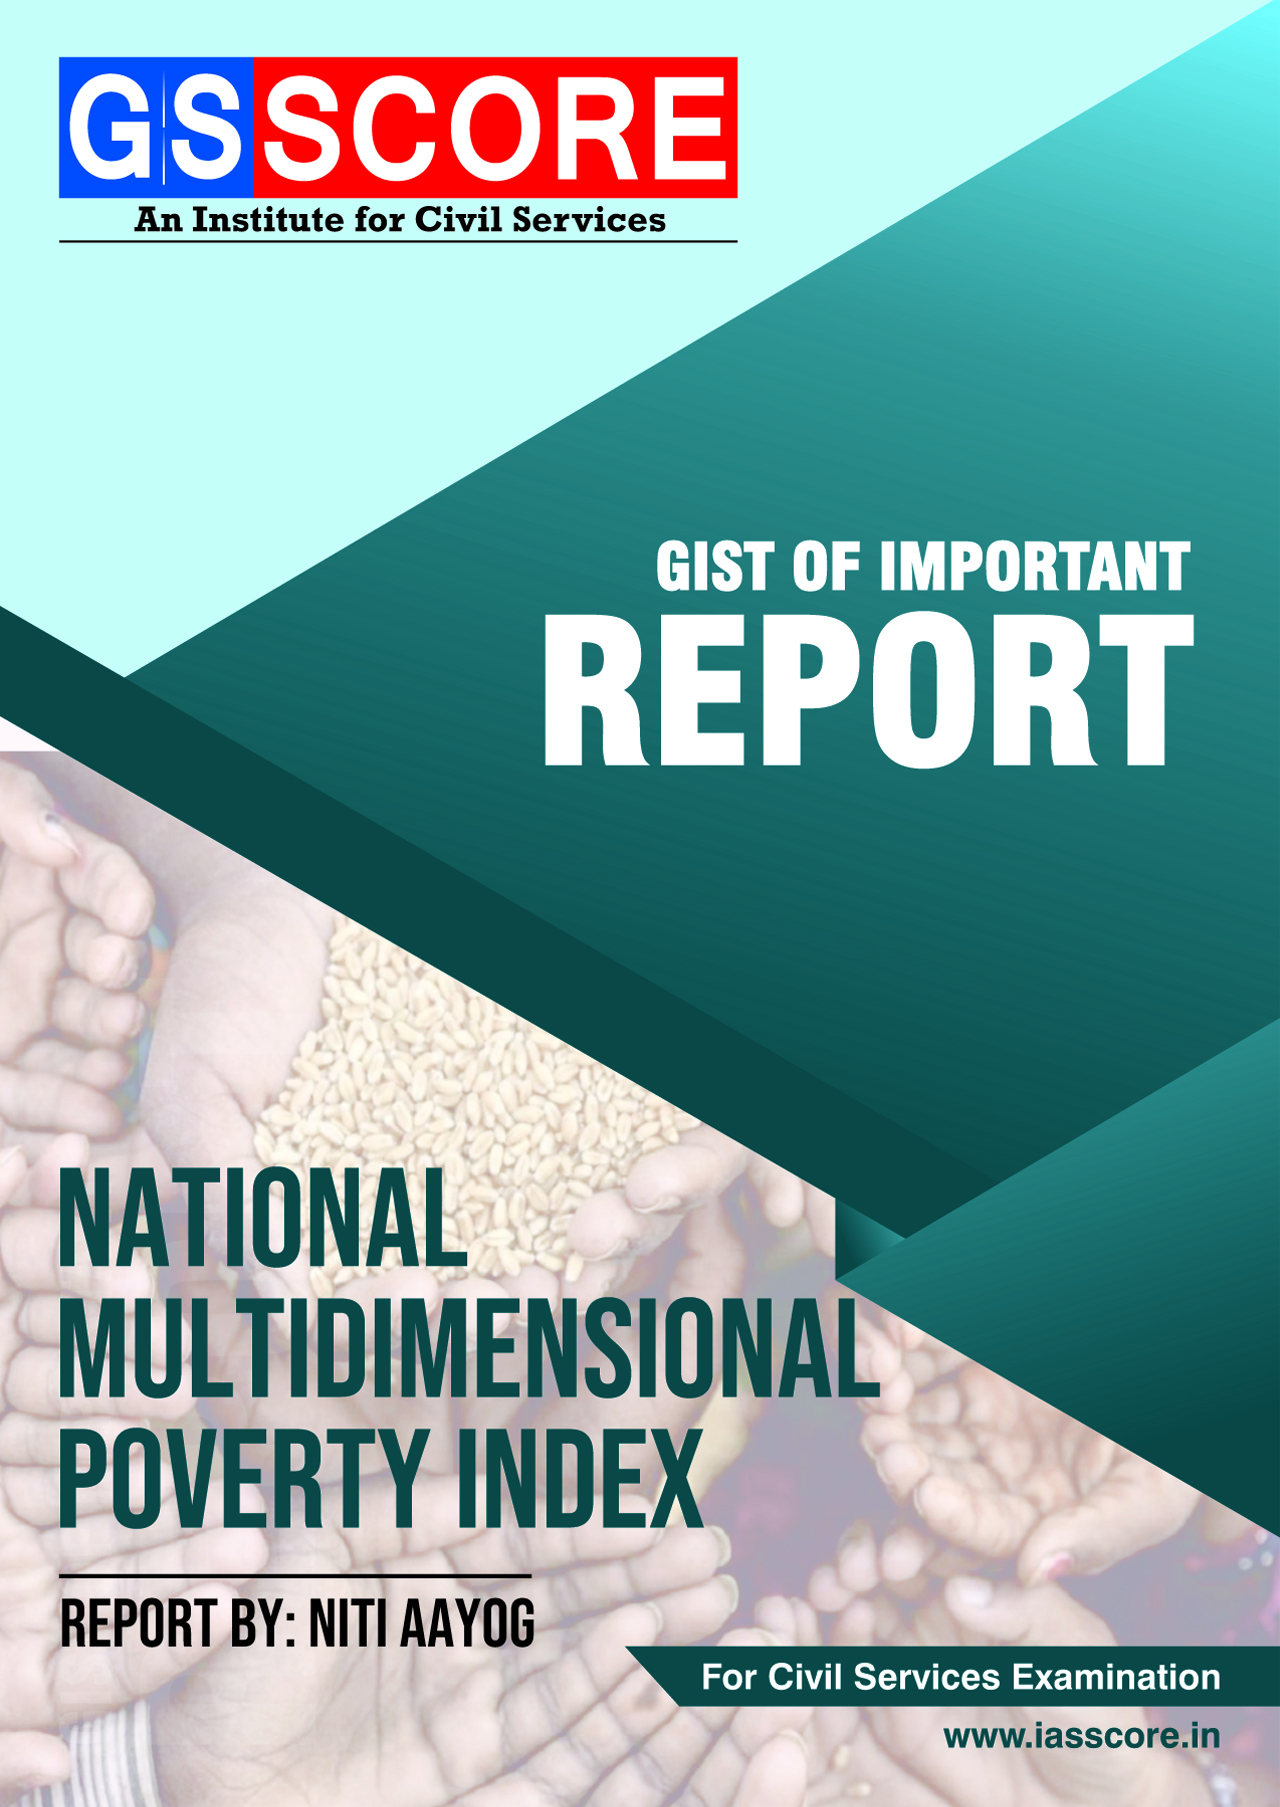 Gist of Report: Multidimensional Poverty Index (MPI)